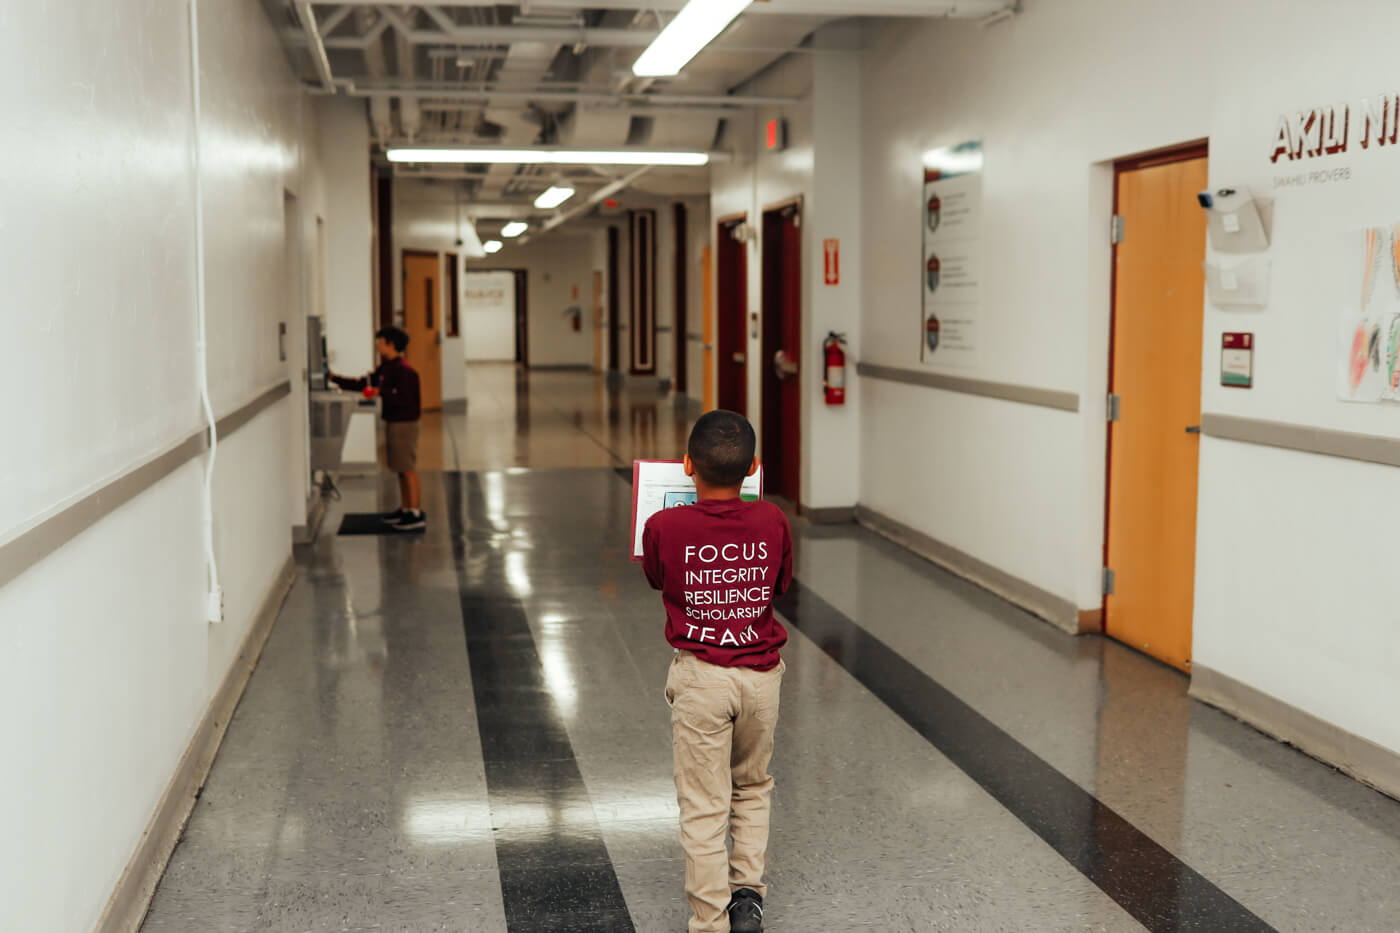 Child is walking through school hallway holding book, with his back to the camera the shirt reads "focus, integrity, resilience, scholarship, team"